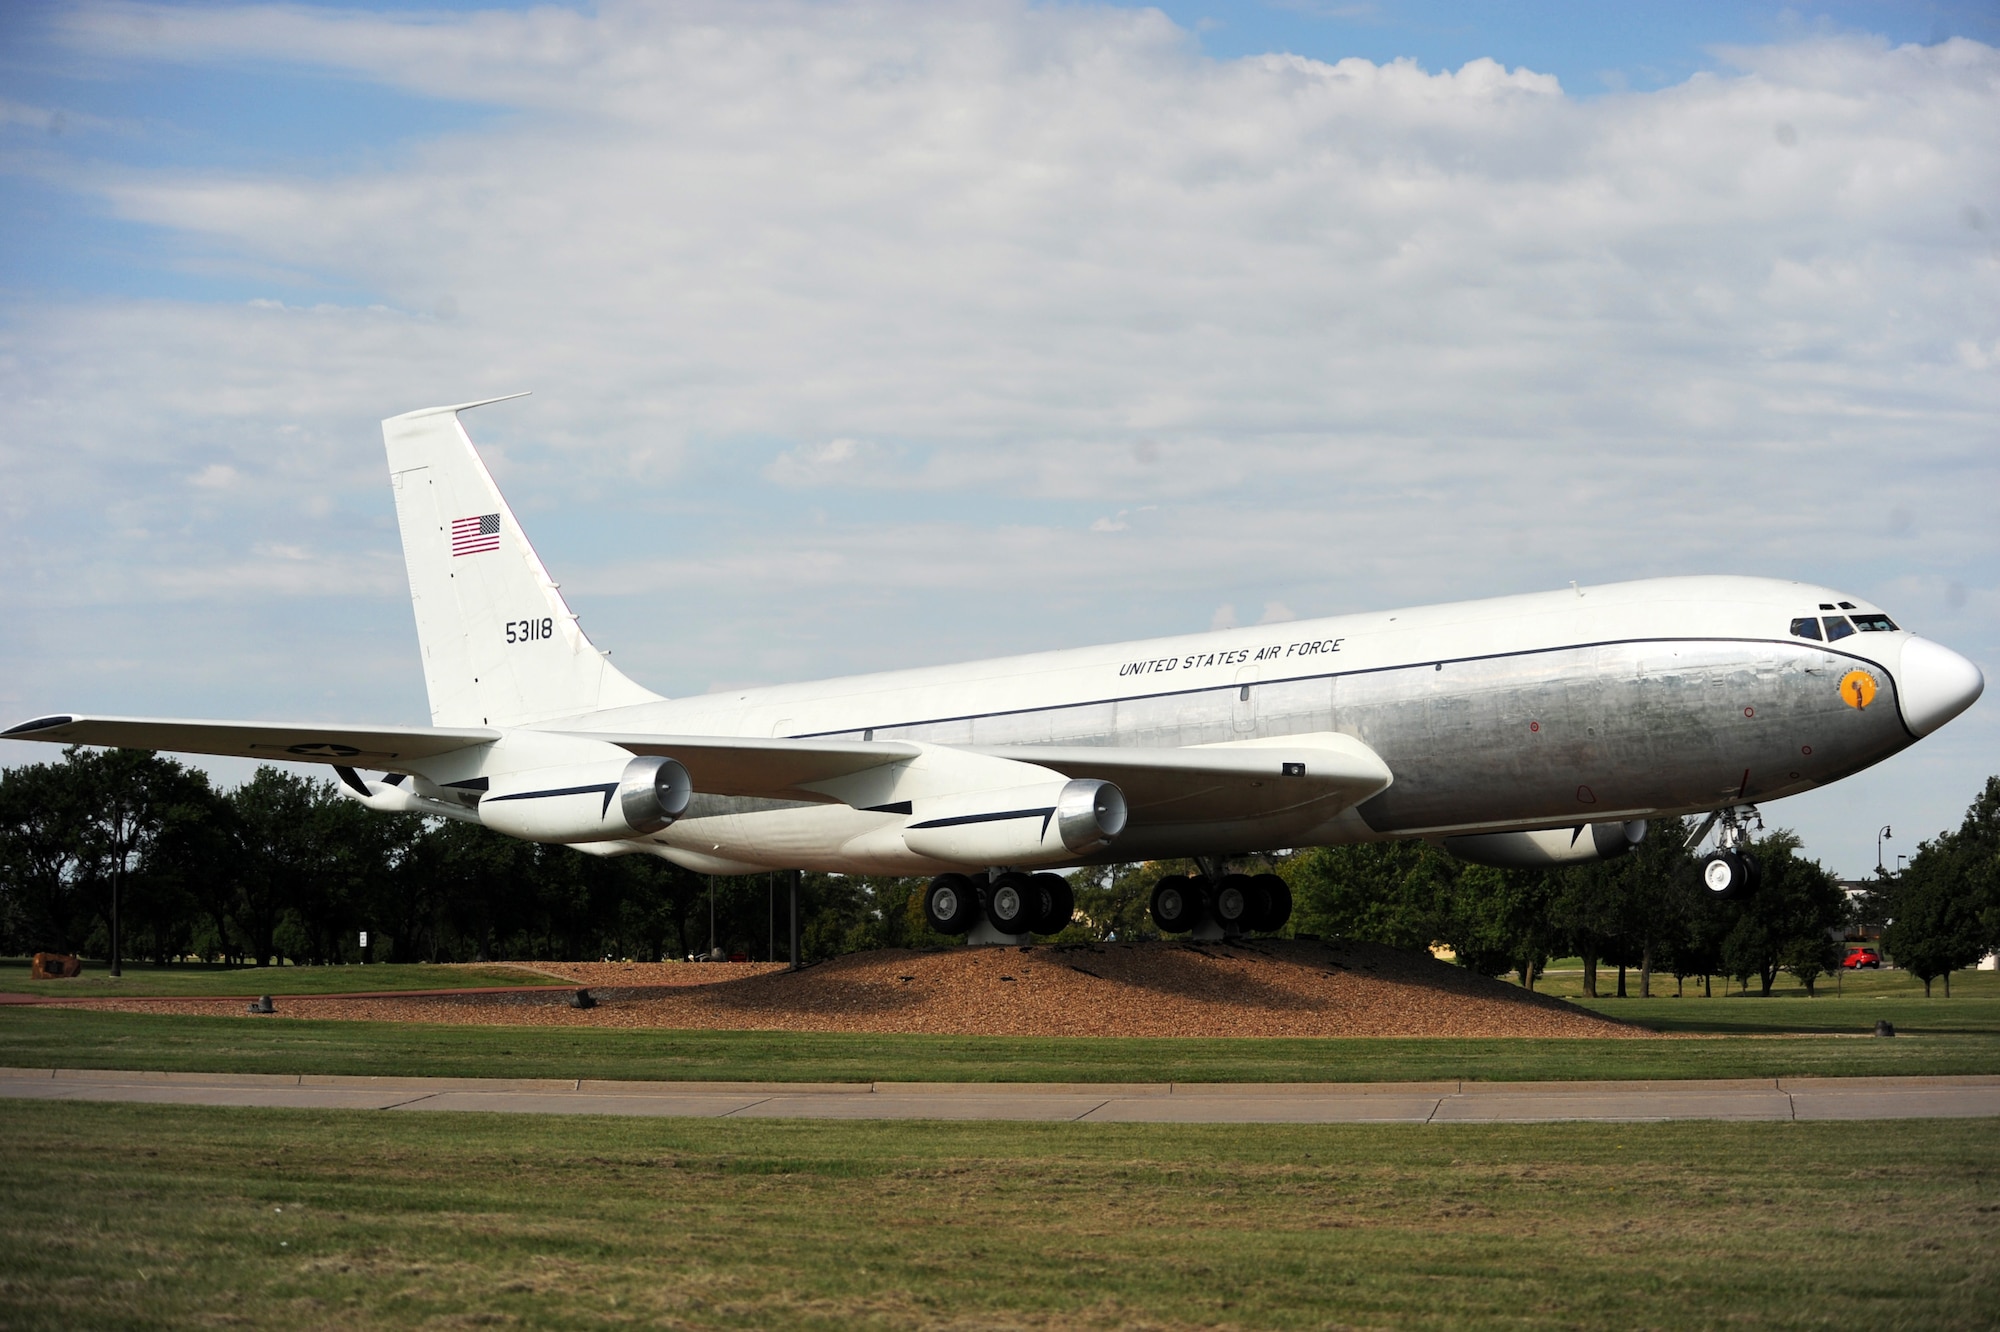 Aircraft 55-3118 sits on display, Aug. 13, 2015, near the east gate of McConnell Air Force Base, Kan. The aircraft completed its first flight on Aug. 31, 1956 and was the first of 732 KC-135 Stratotankers delivered to the Air Force. Nicknamed “City of Renton” after the Washington city where it was manufactured, the Stratotanker was retired after decades of service in the Air Force and more than 40 years after its first flight. (U.S. Air Force photo by Airman 1st Class Jenna Caldwell)